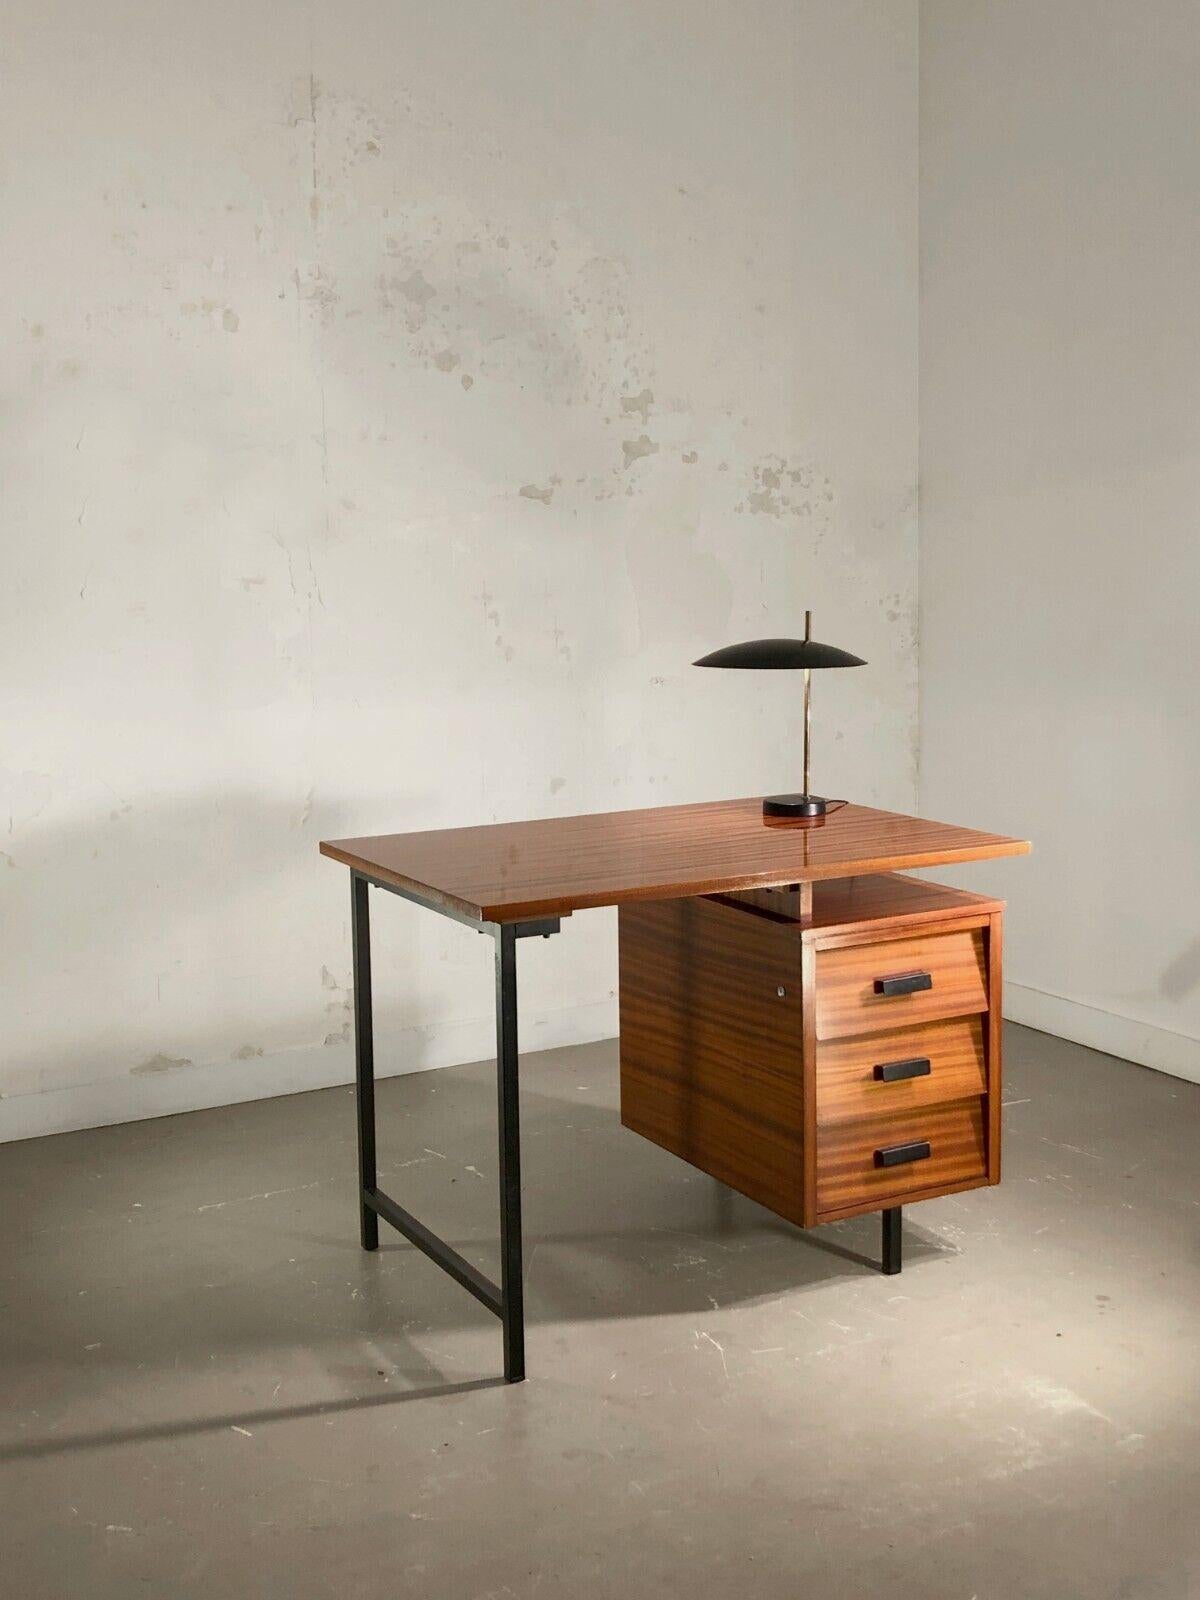 A rigorous and luxurious small desk, Modernist, Constructivist, Reconstruction, black lacquered square section metal structures, box with 3 drawers (and 1 drawer top) and 1 large lacquered mahogany veneer top, model CM 172 by Pierre Paulin, Thonet